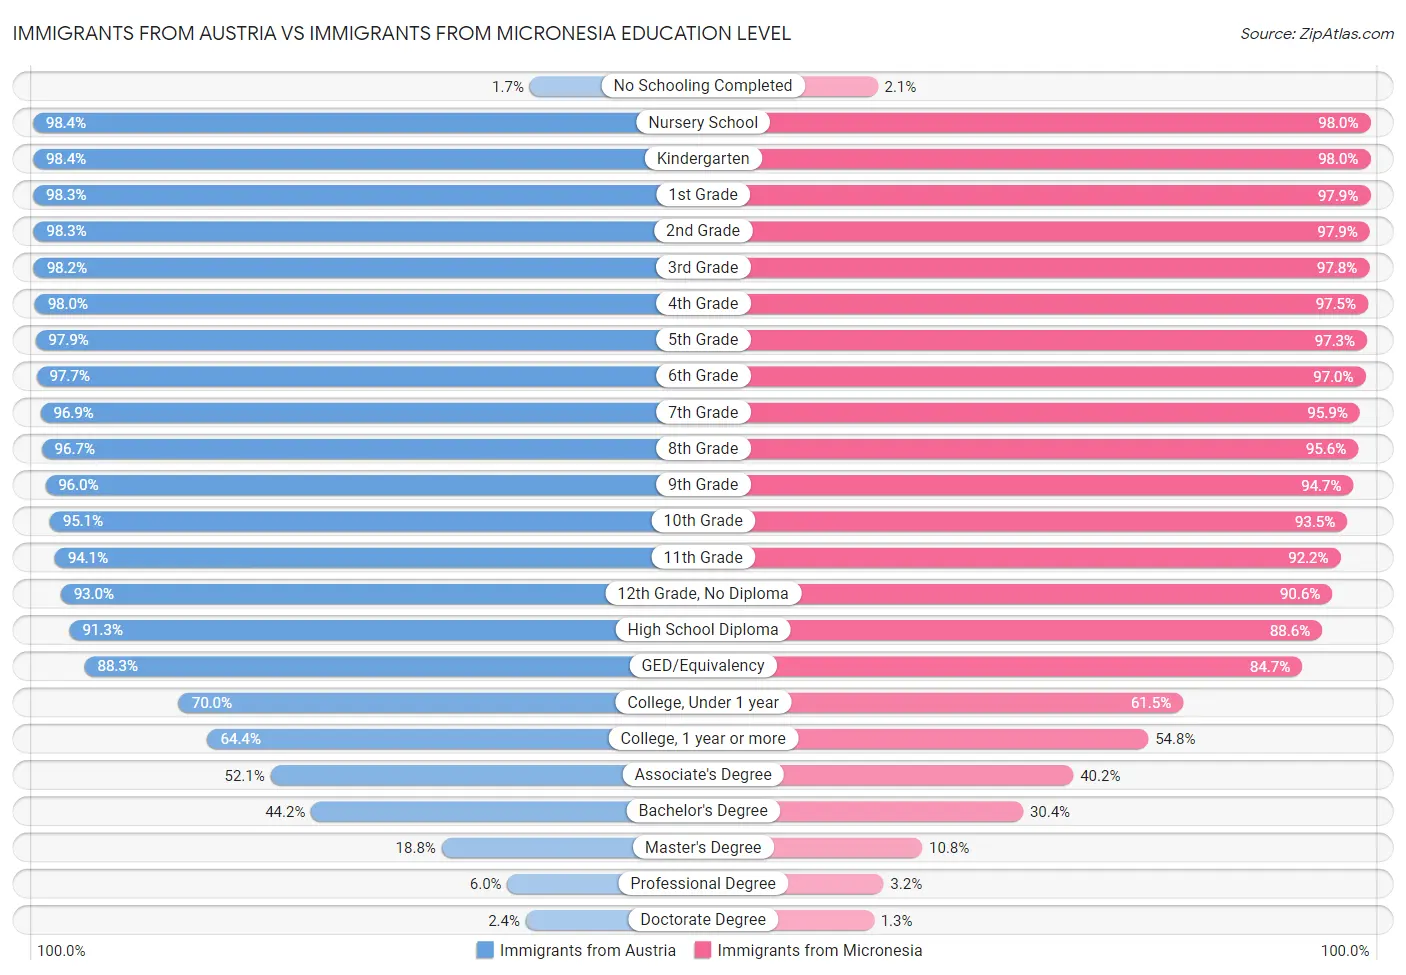 Immigrants from Austria vs Immigrants from Micronesia Education Level